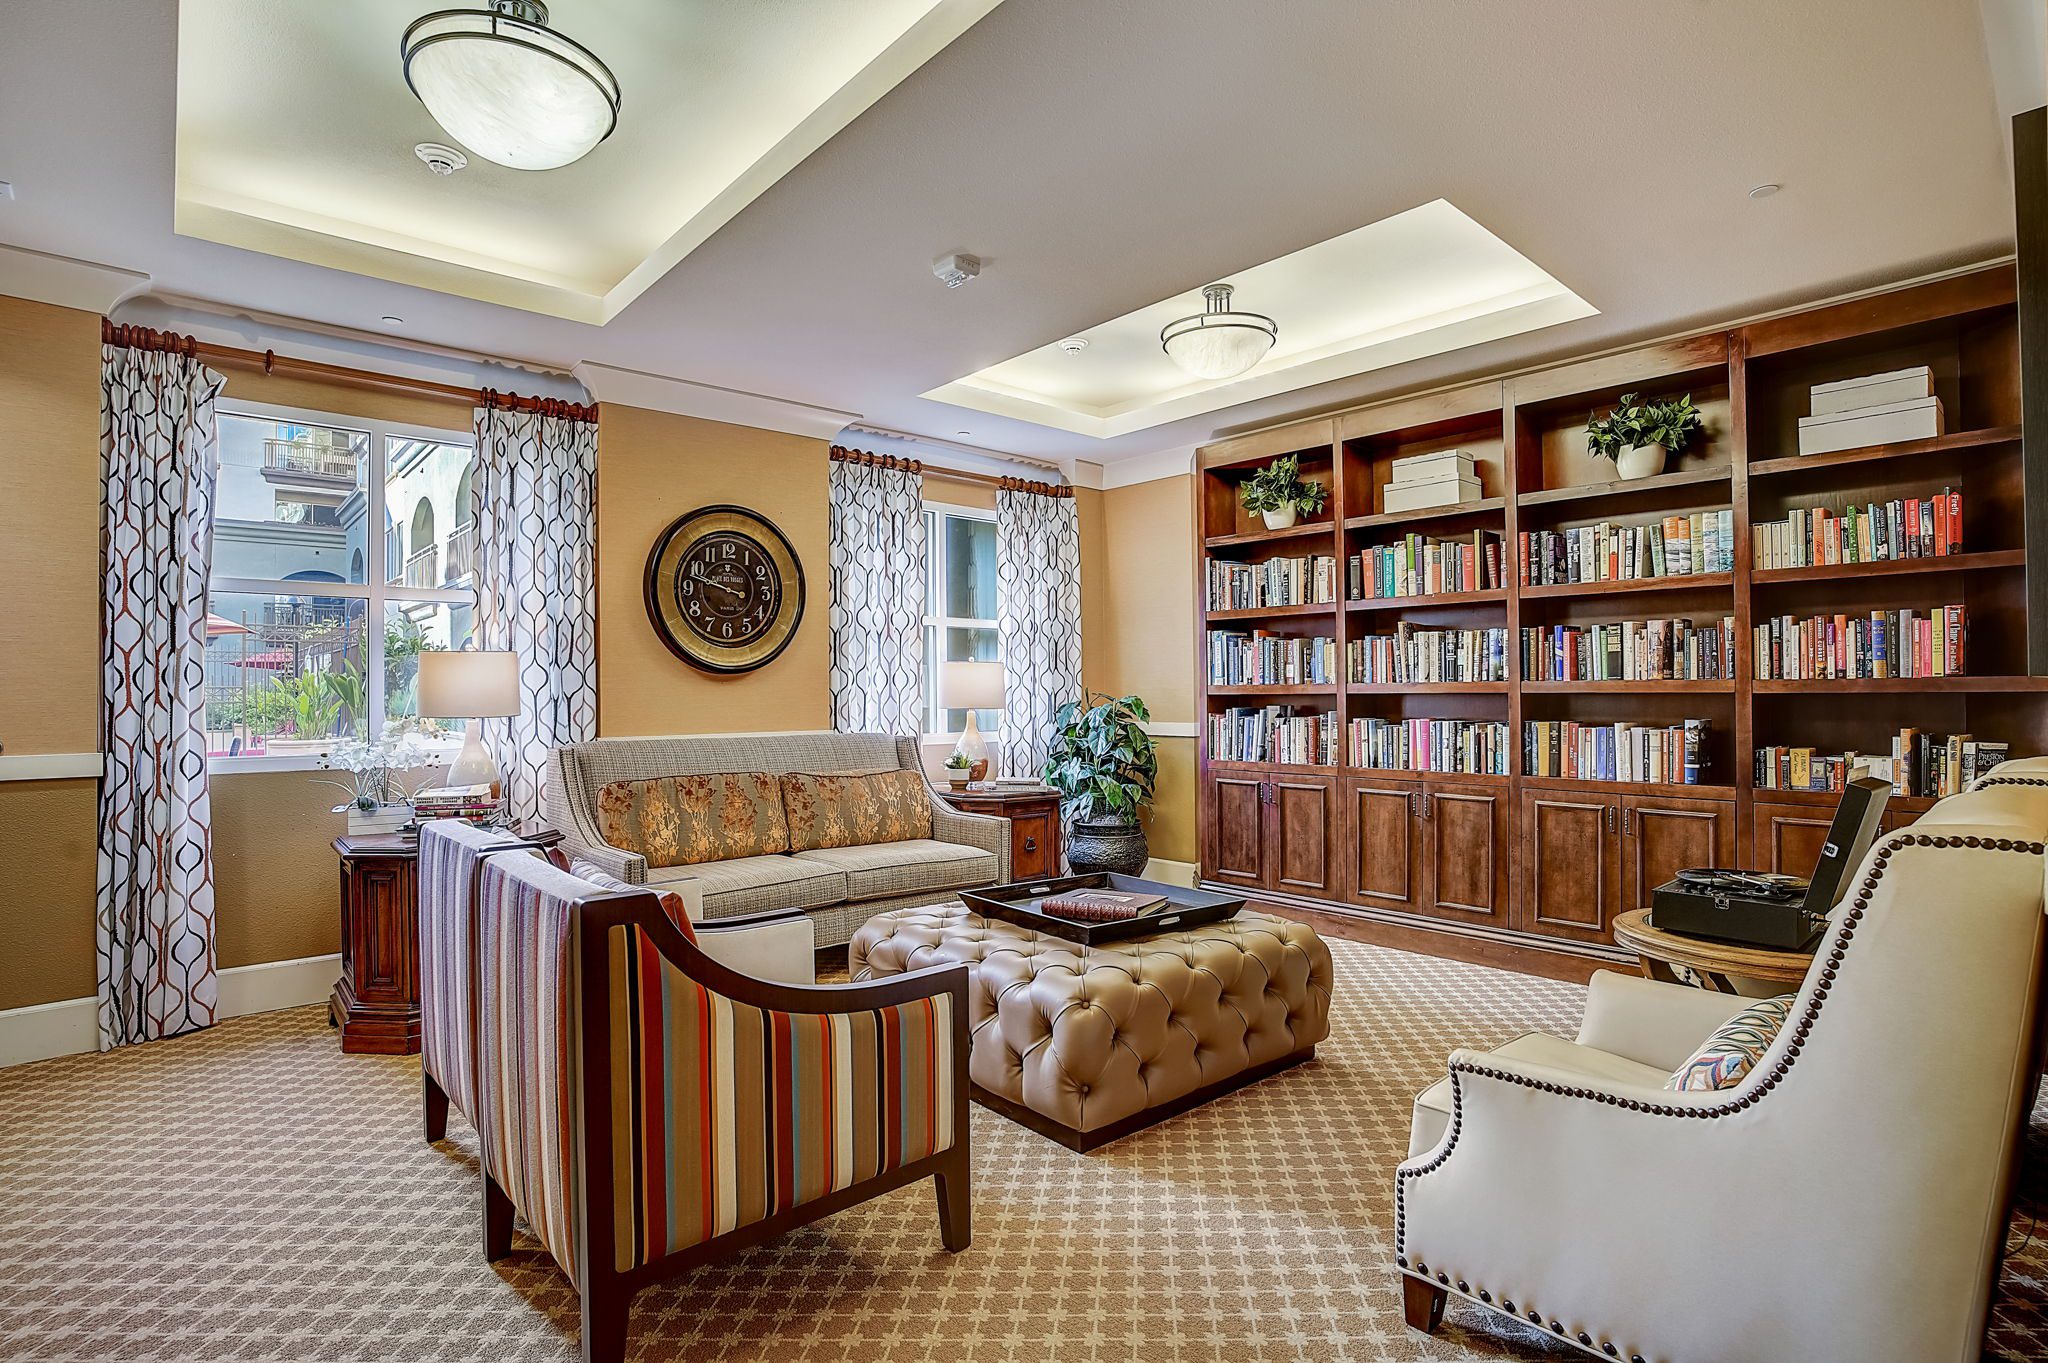 A cozy living room with a spacious bookcase filled with books and comfortable chairs for relaxation.